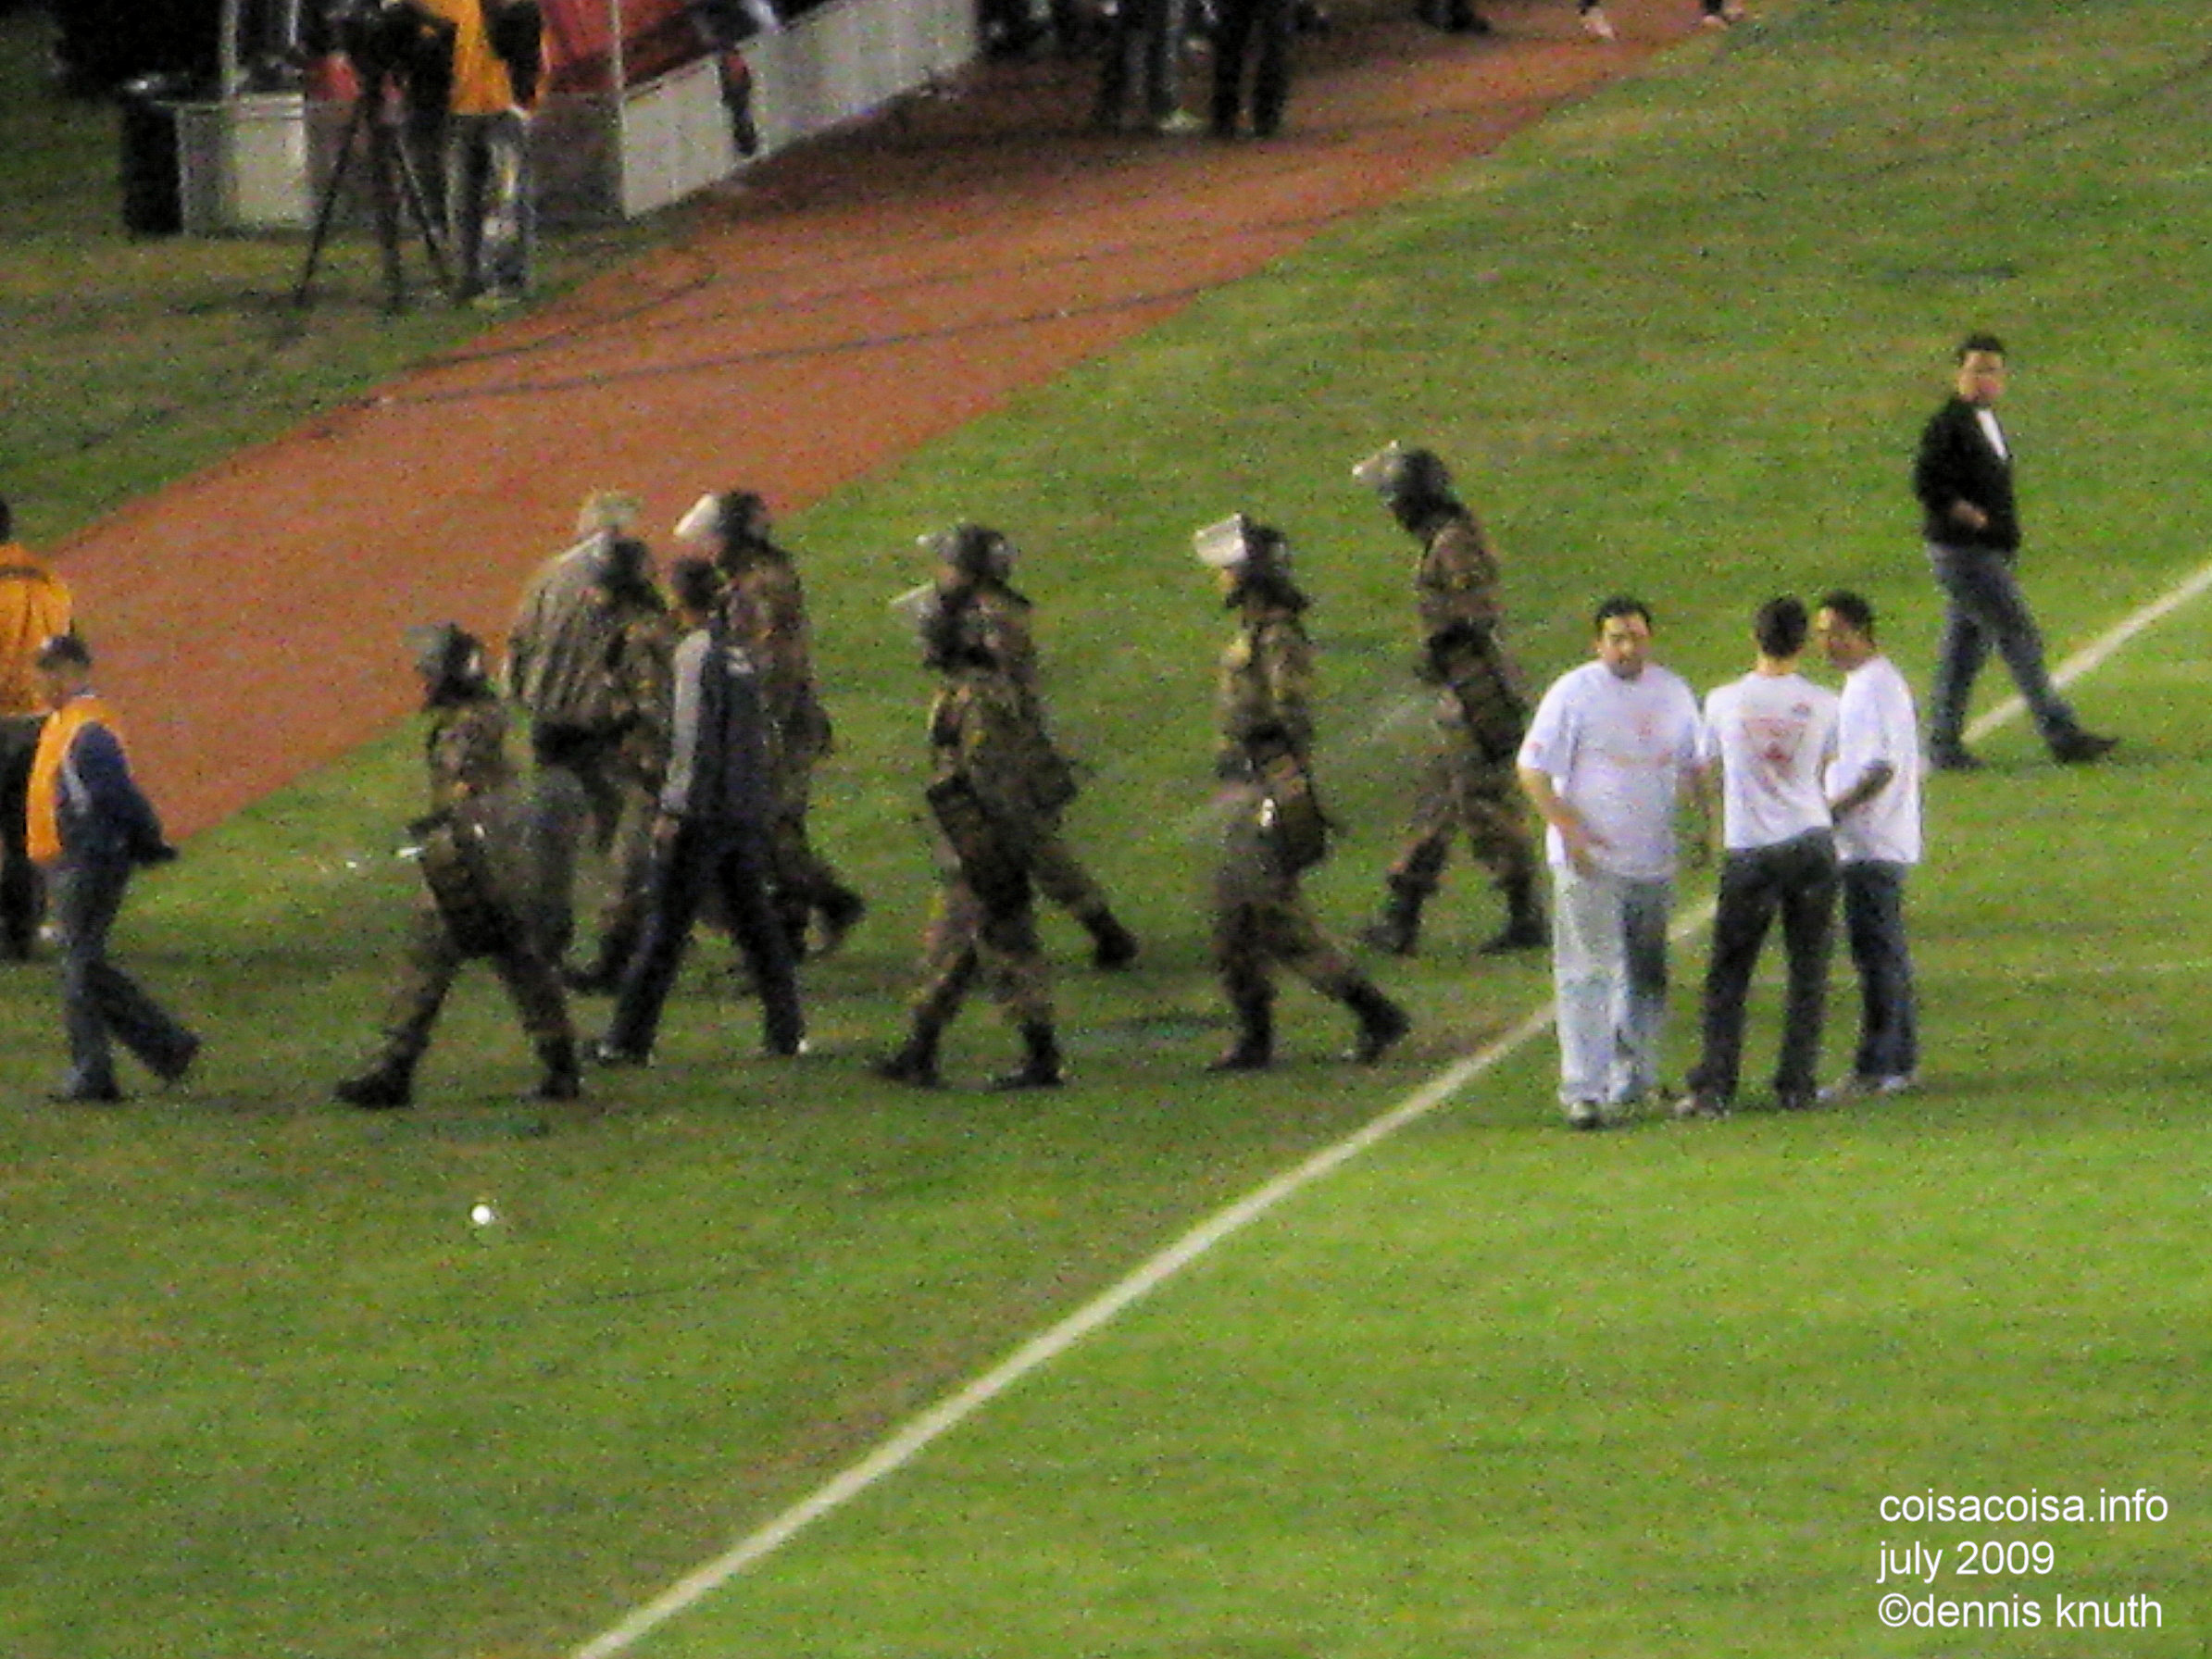 Armed guards escort players off the field